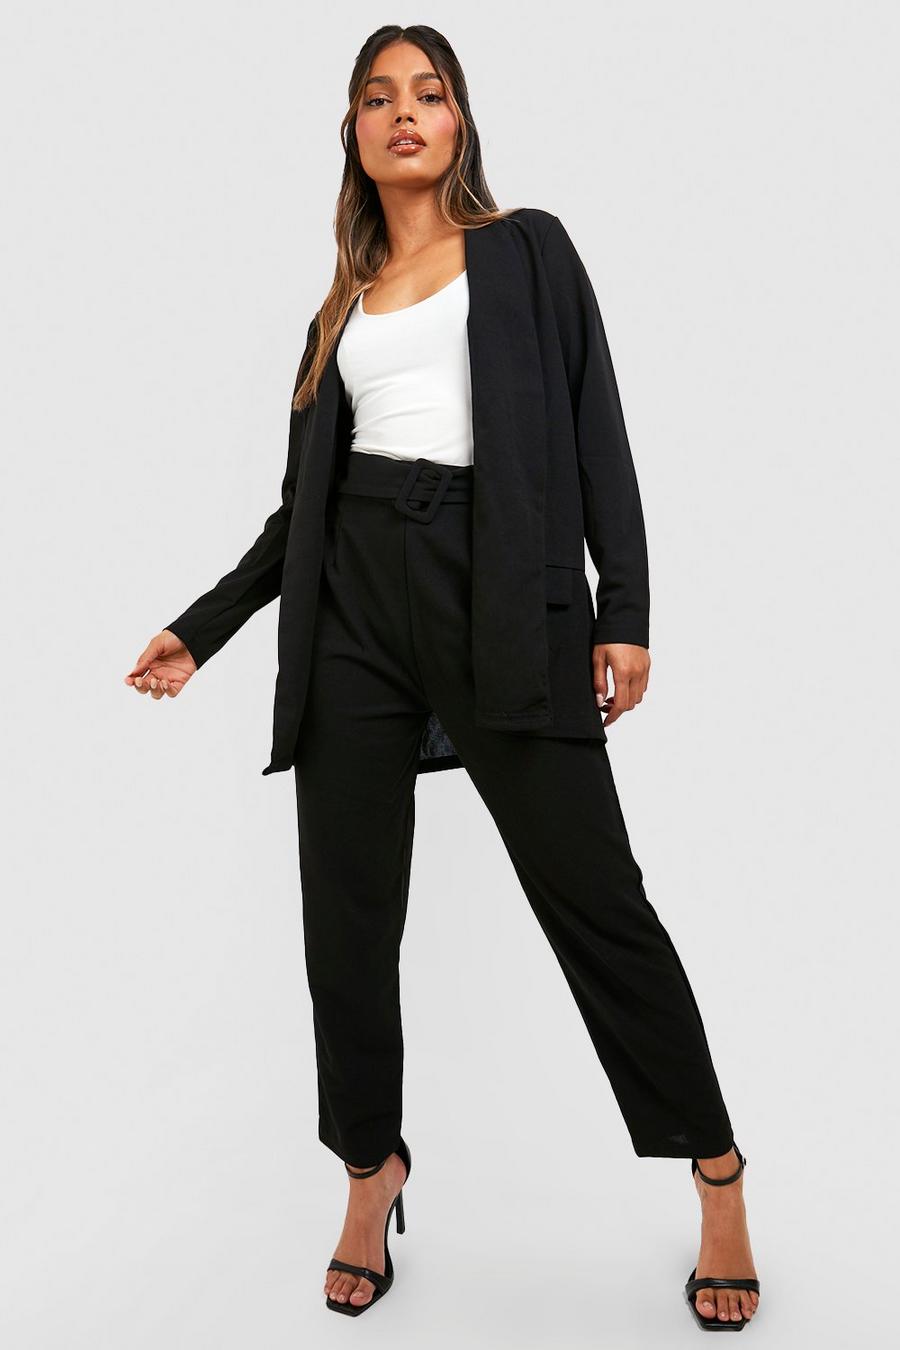 Black Tailored Blazer And Self Fabric Belt Trouser Suit